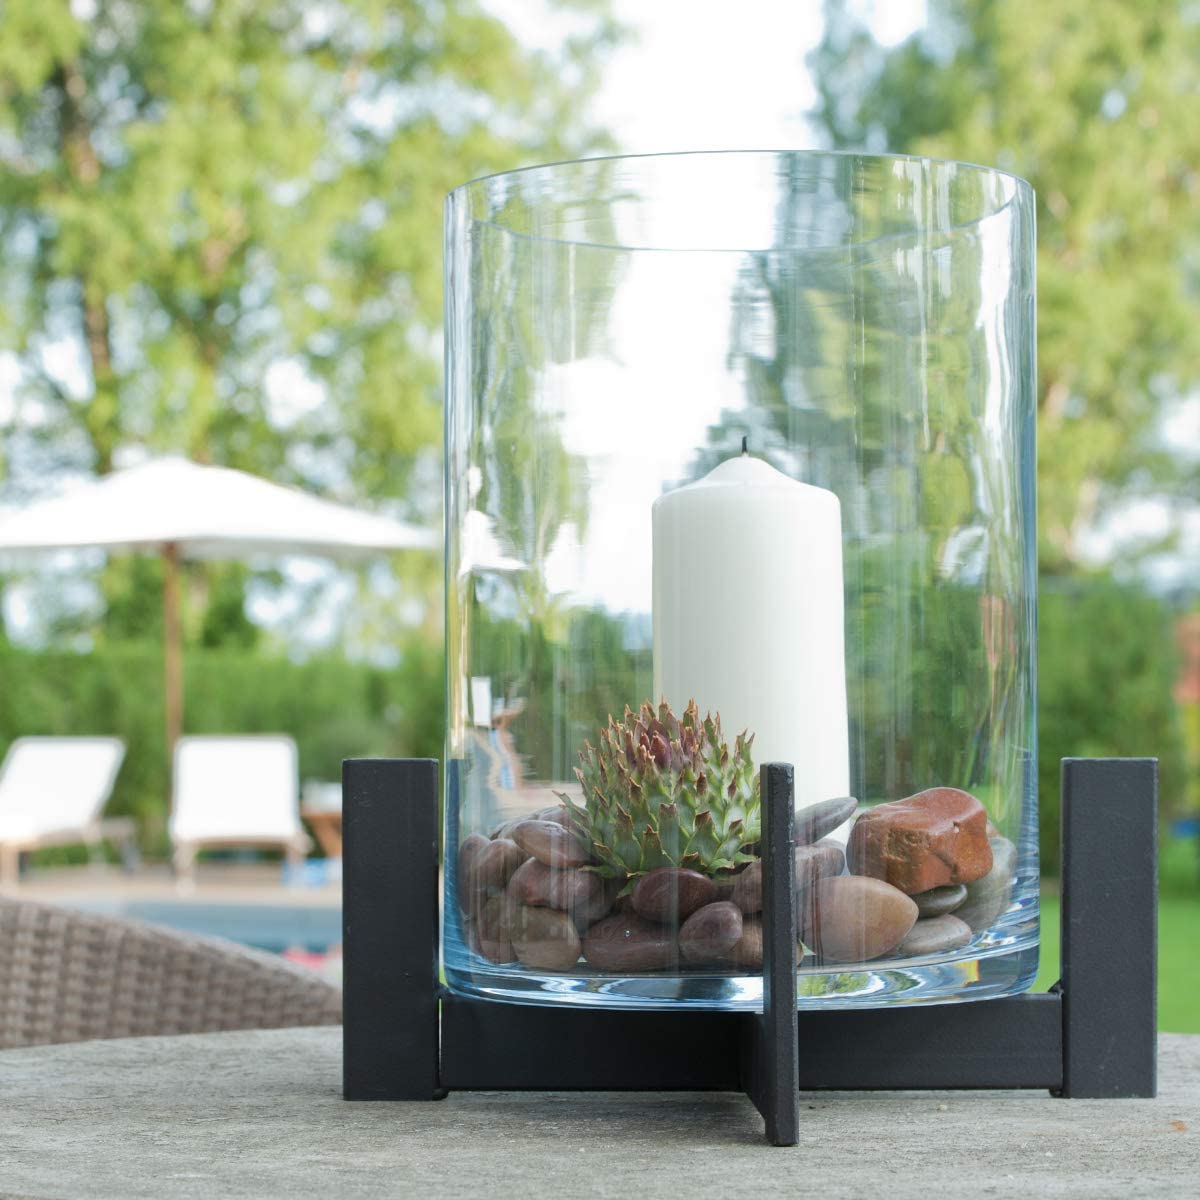 Varia Living Large lantern with glass made of metal/iron for indoors or in the garden as a lantern beautiful for decorating as a candle holder (H 38 cm / Ø 34 cm)